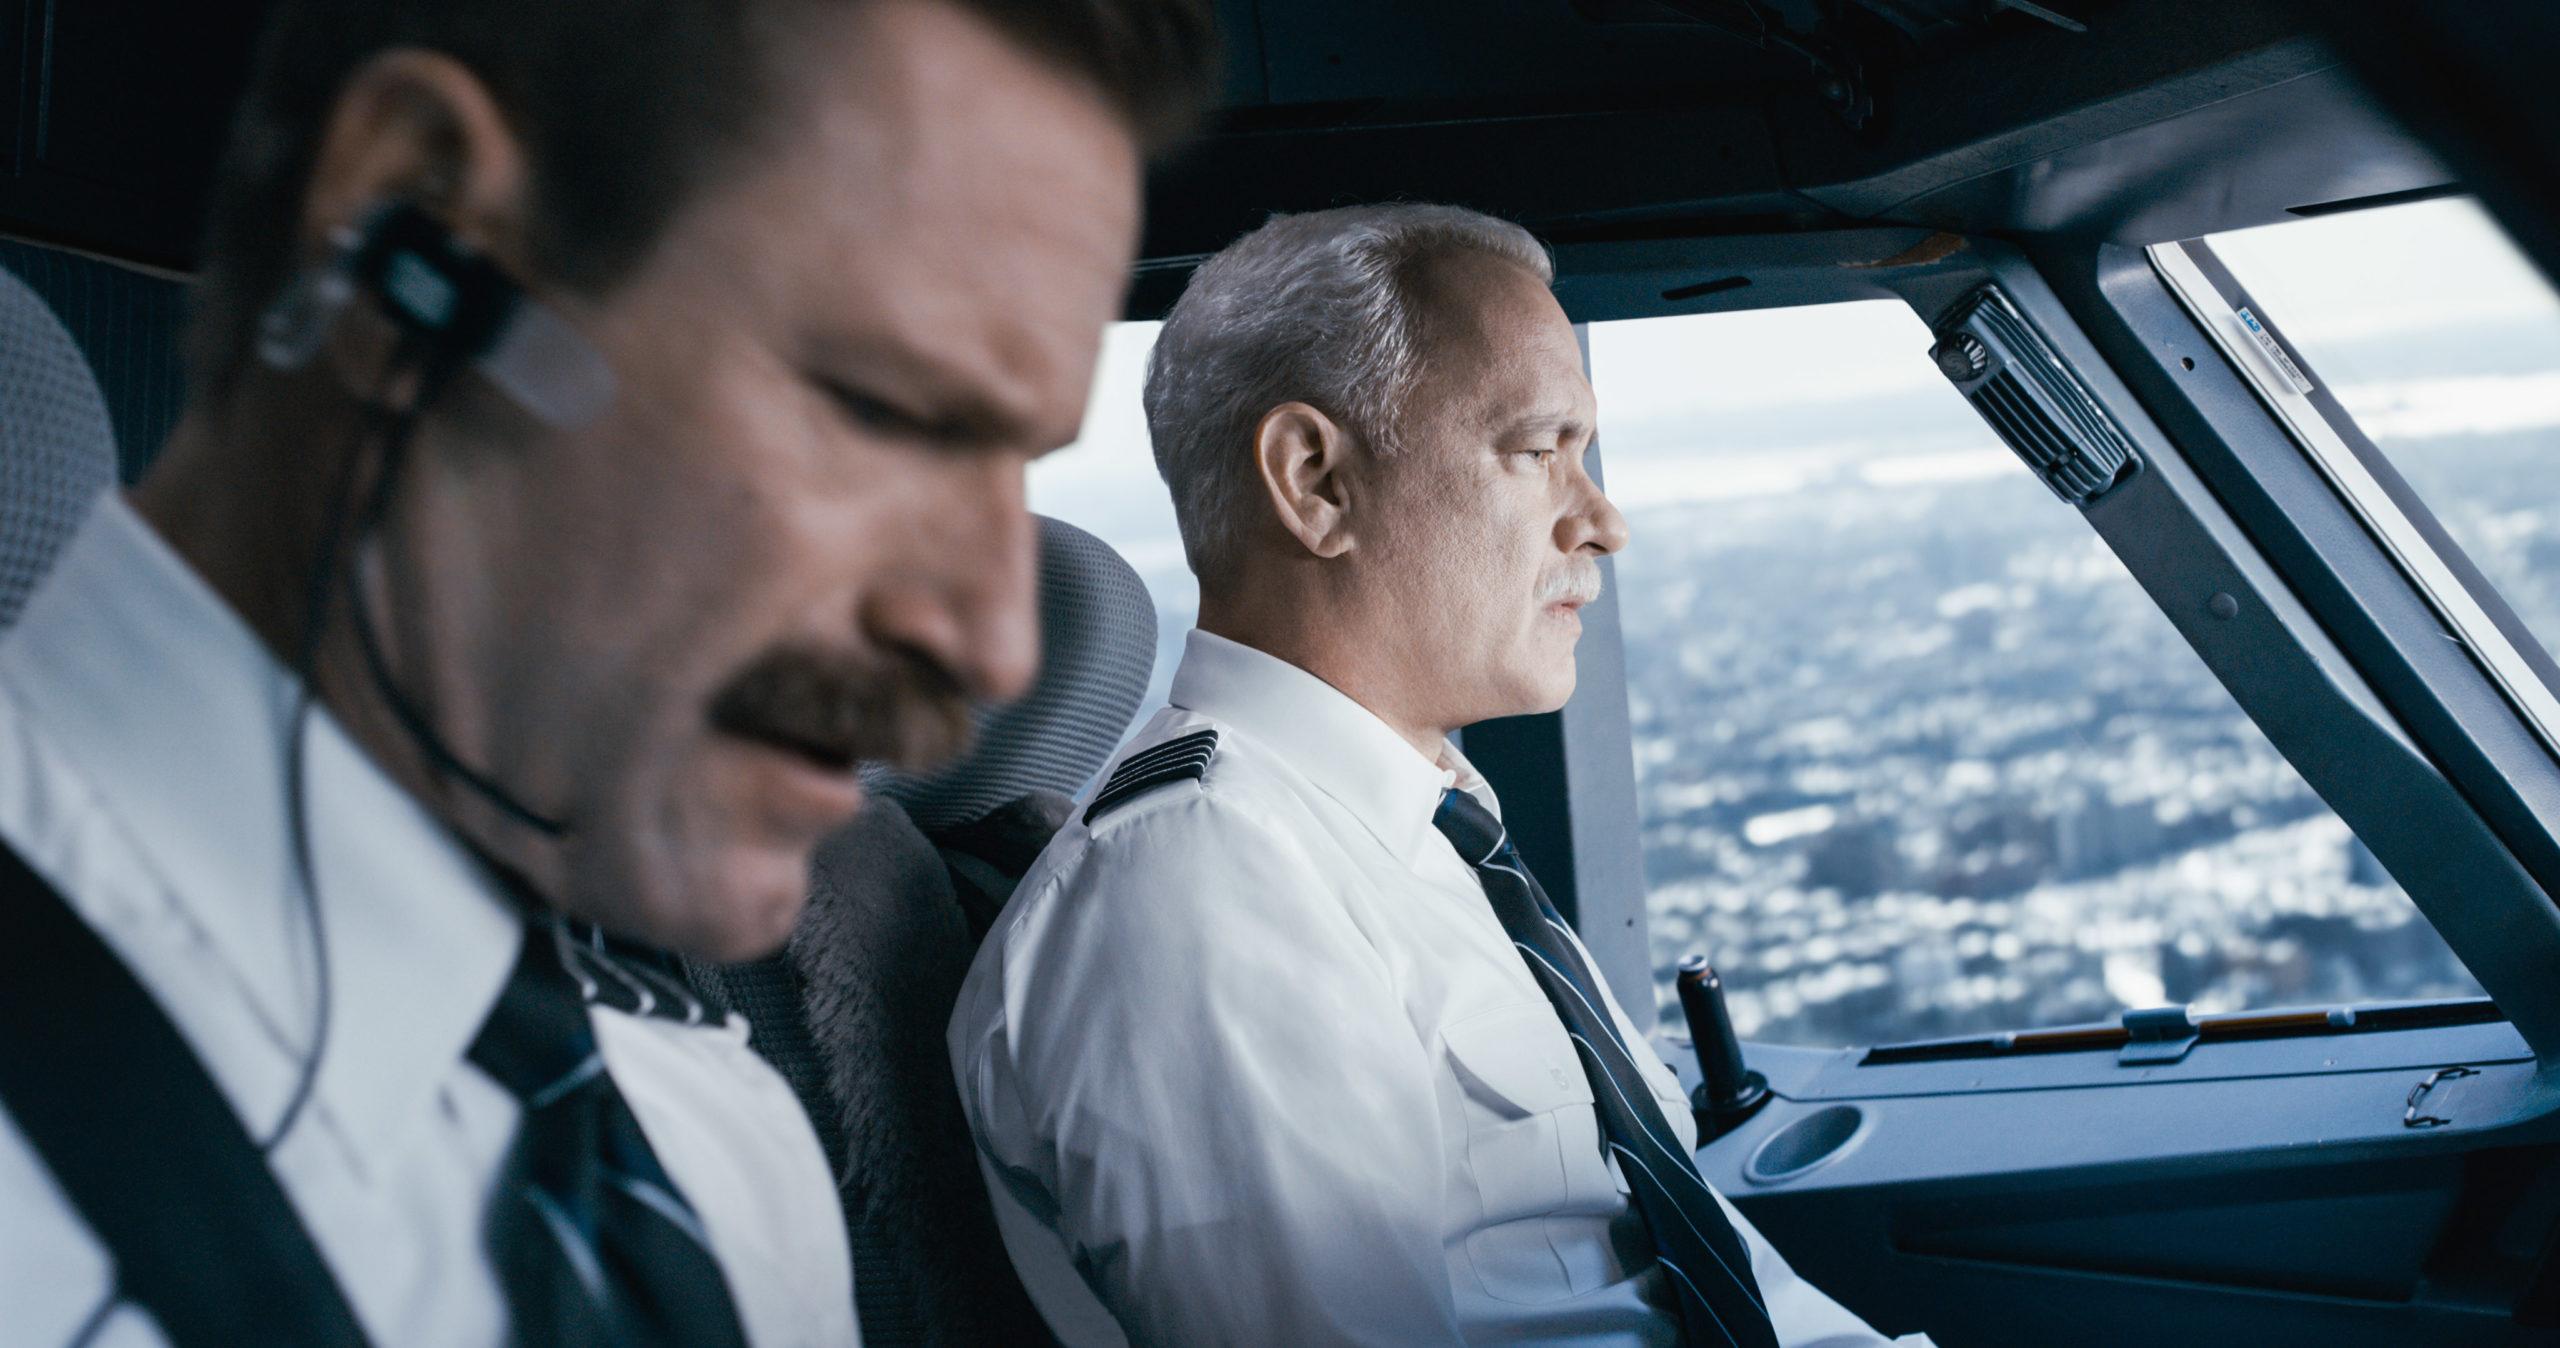 This image released by Warner Bros. Pictures shows Tom Hanks, right, and Aaron Eckhart in a scene from "Sully." (Warner Bros. Pictures via AP)